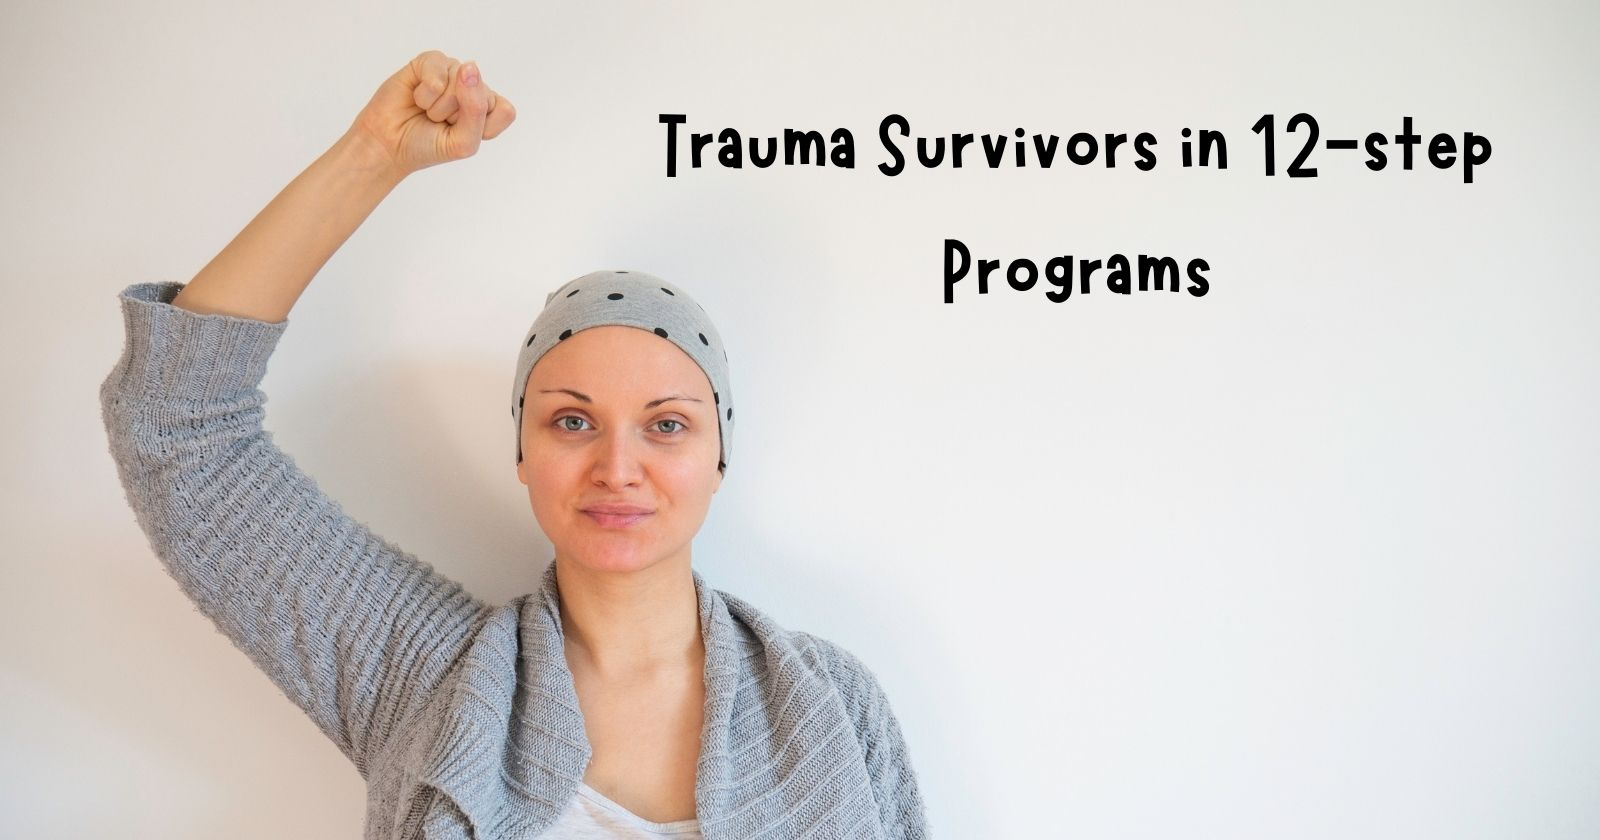 Trauma Survivors in 12-Step Programs

Girl making power sign and hurray